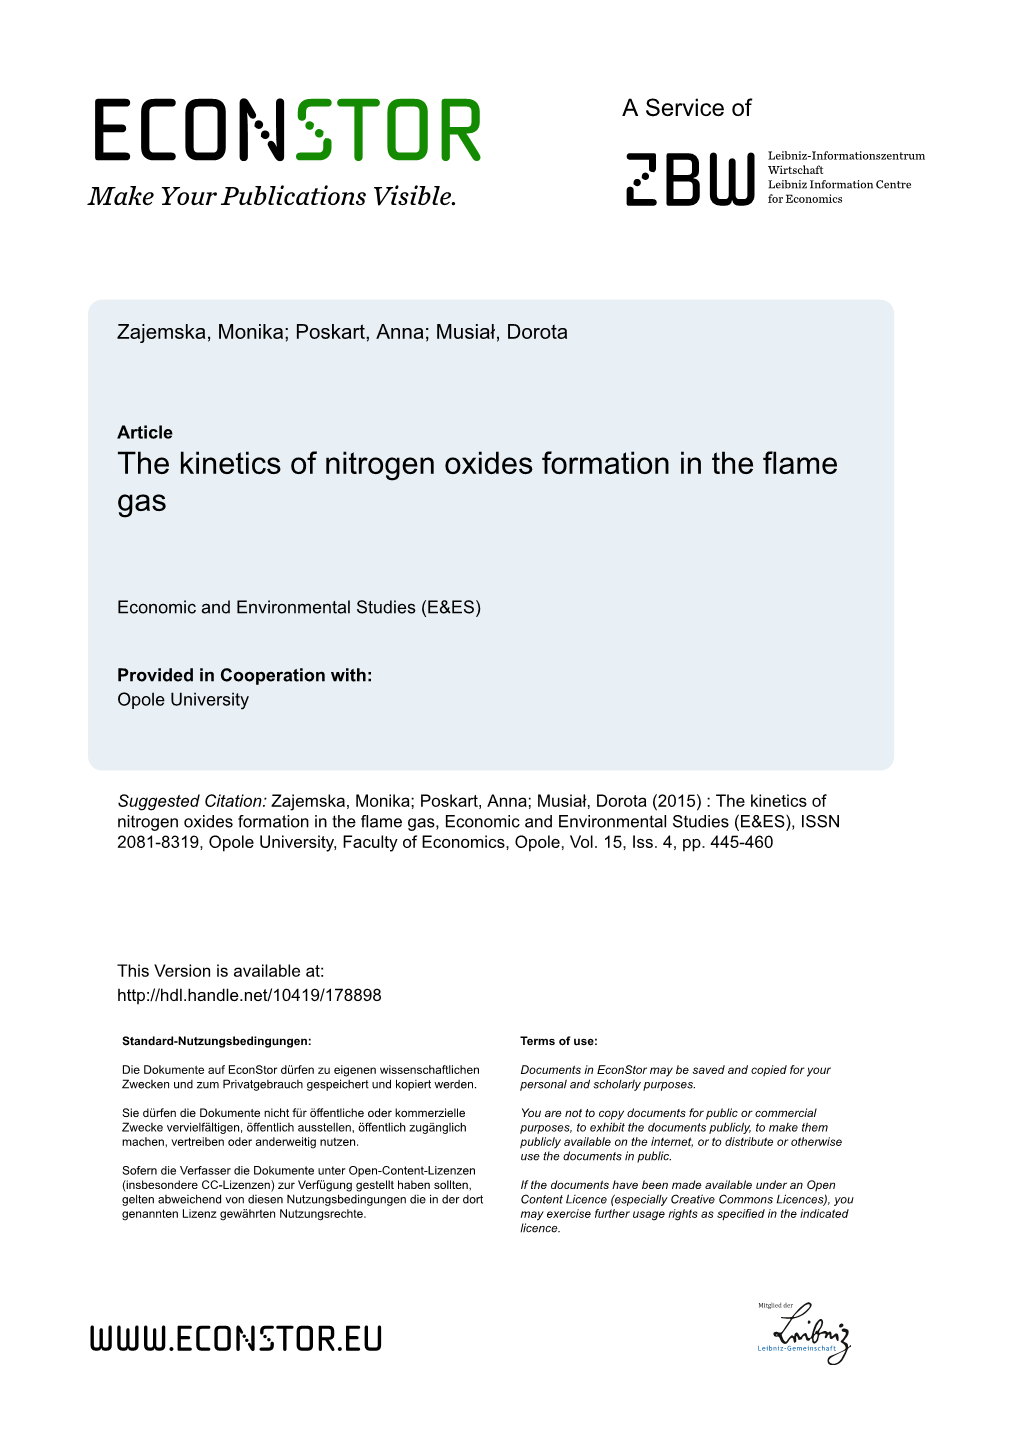 The Kinetics of Nitrogen Oxides Formation in the Flame Gas